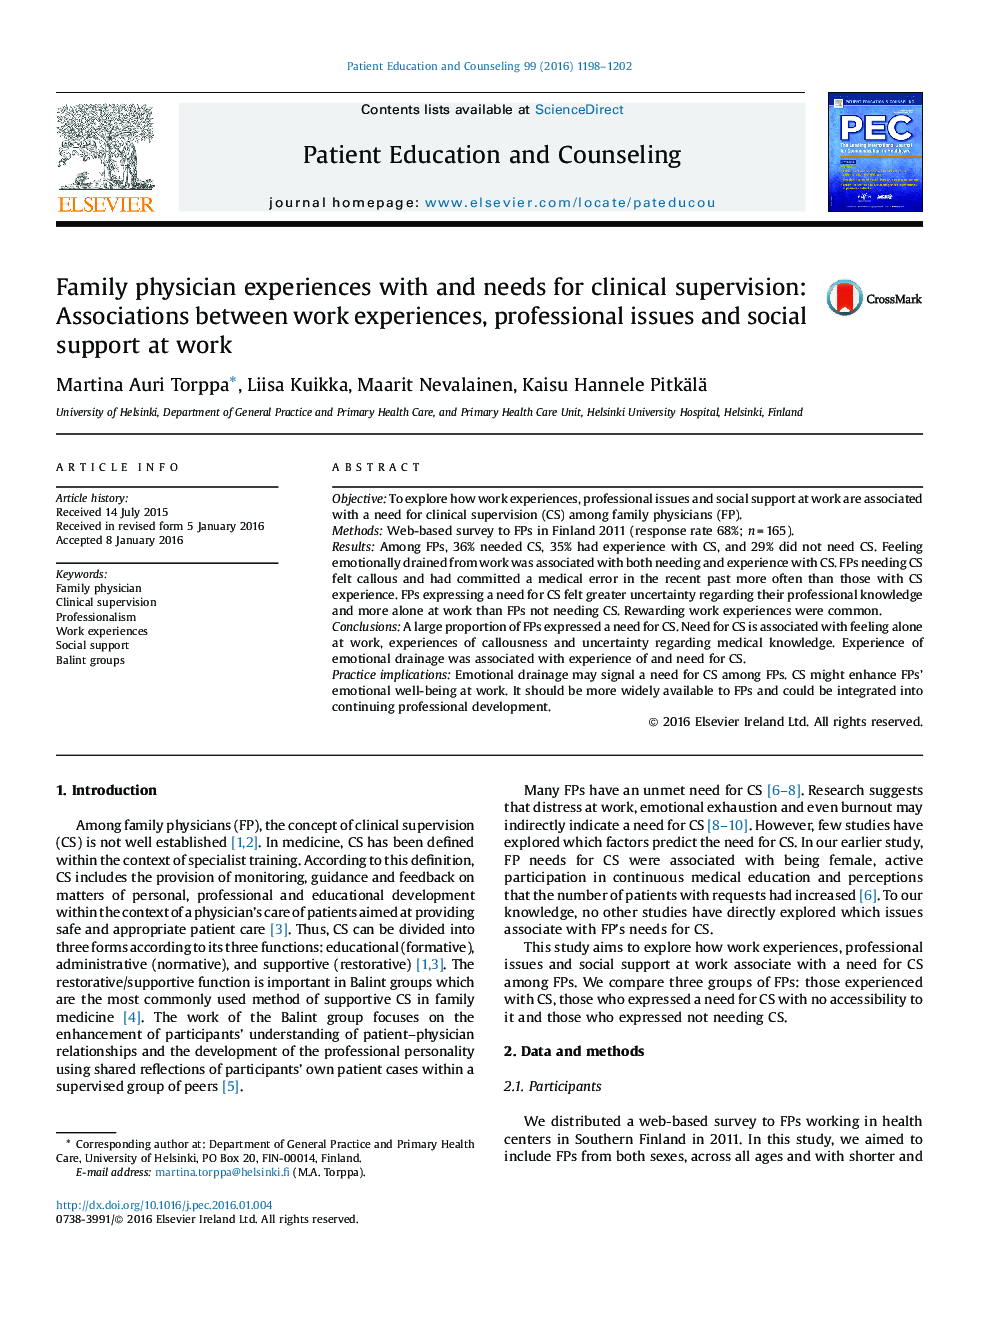 Family physician experiences with and needs for clinical supervision: Associations between work experiences, professional issues and social support at work